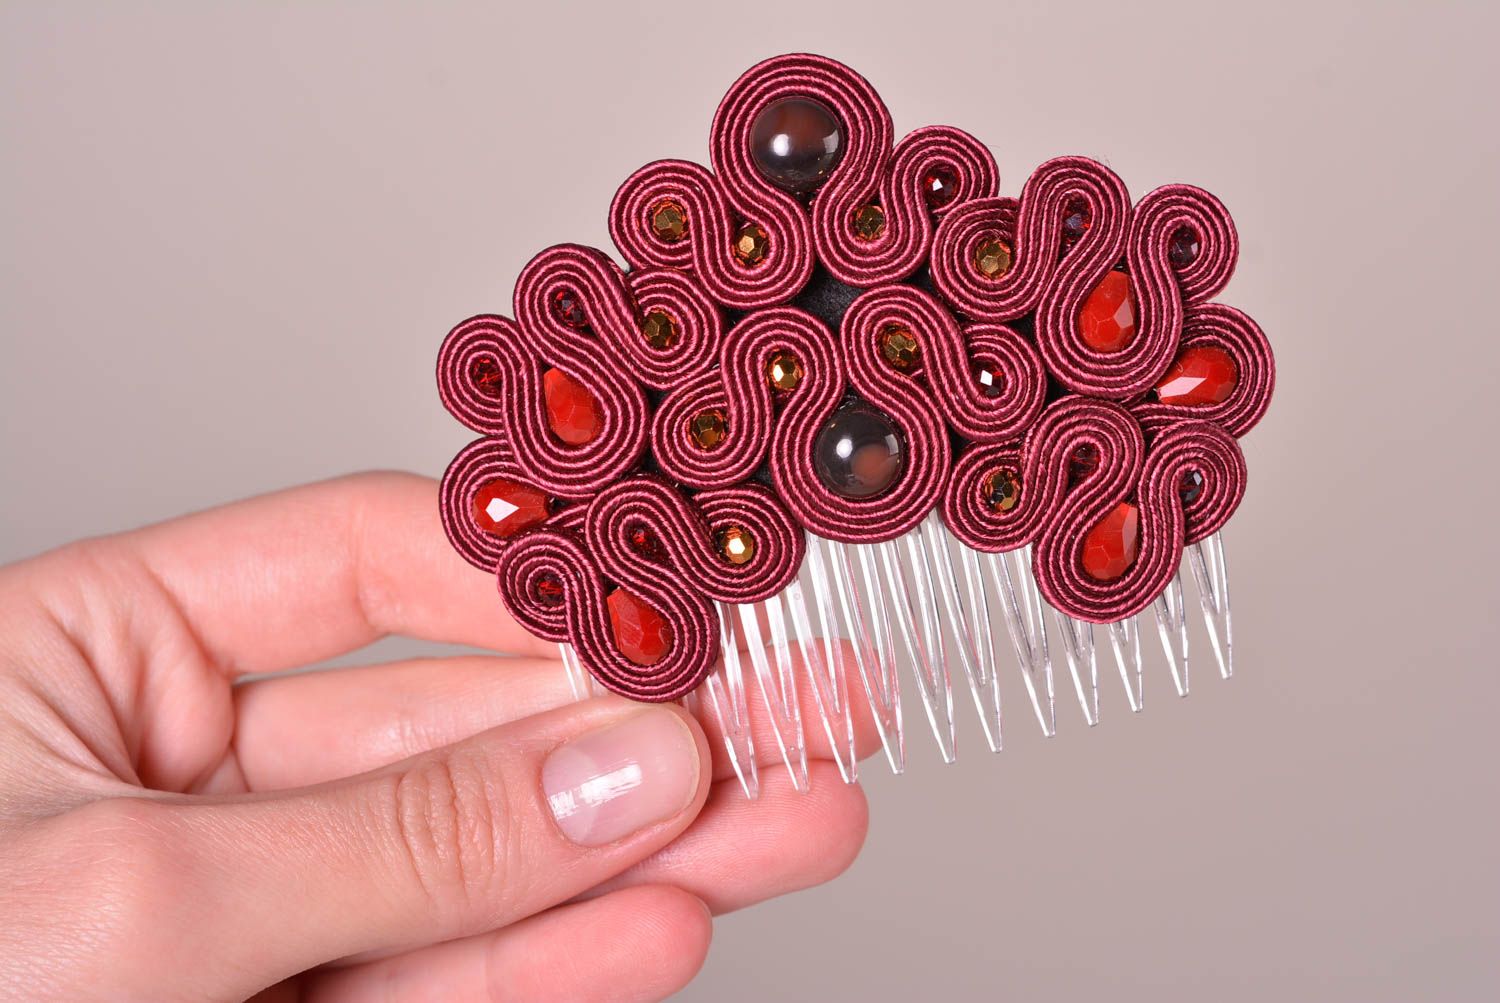 Handmade hair comb designer hair accessories hair jewelry best gifts for girls photo 2